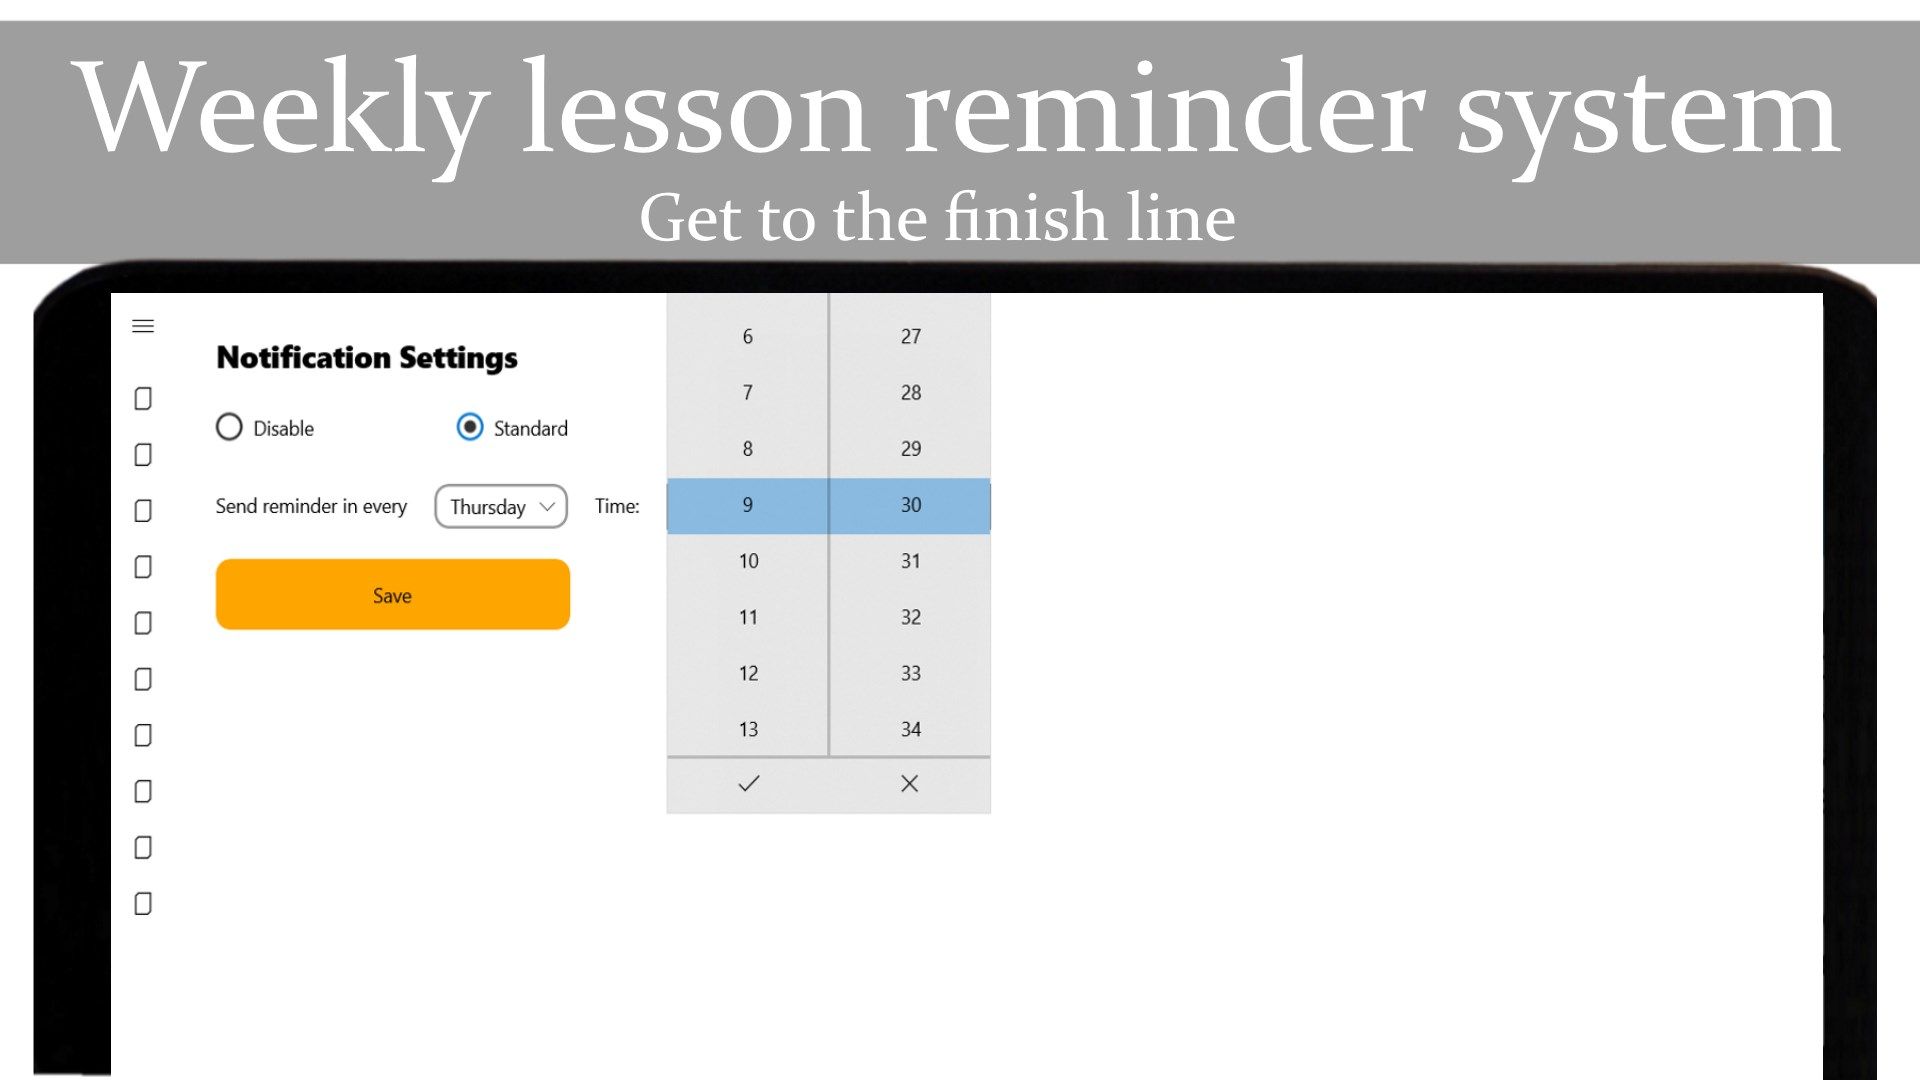 We will help you get to the finish line. Weekly lesson reminder